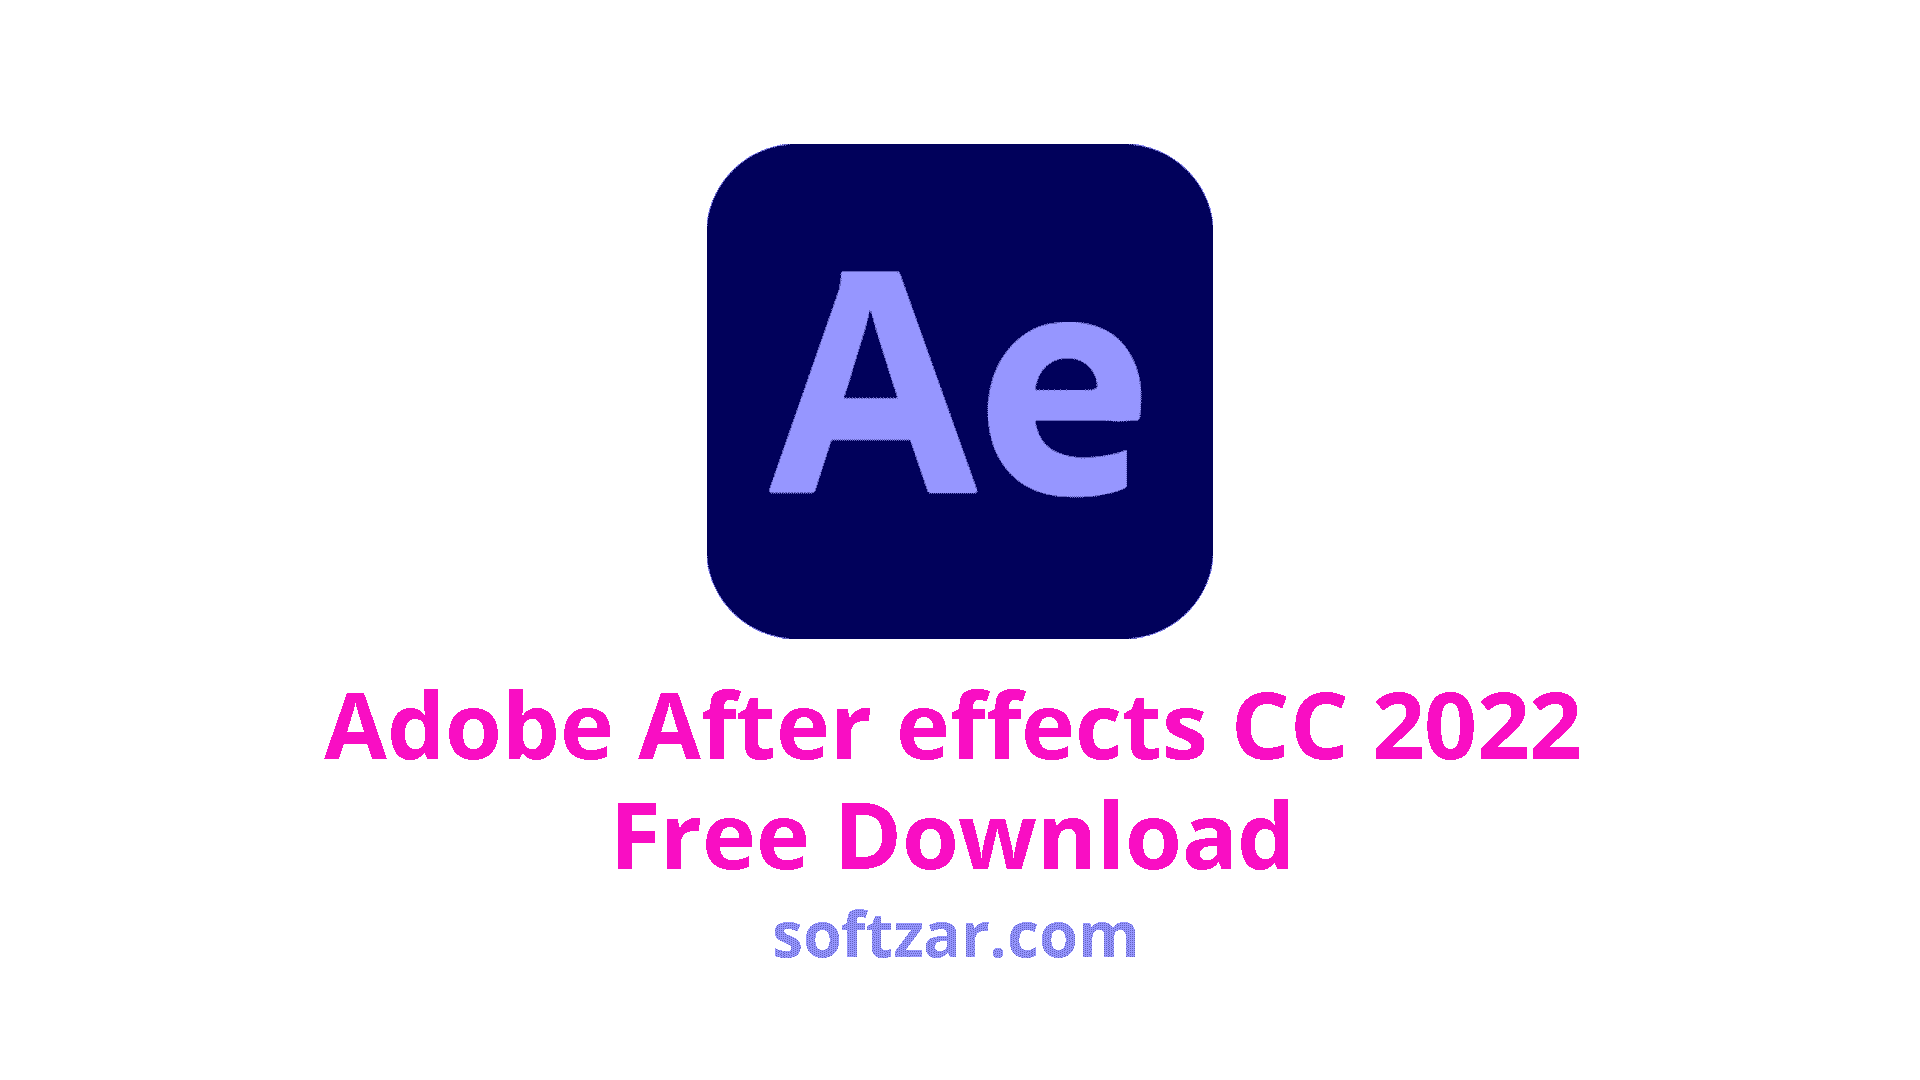 adobe after effects serial number cs6